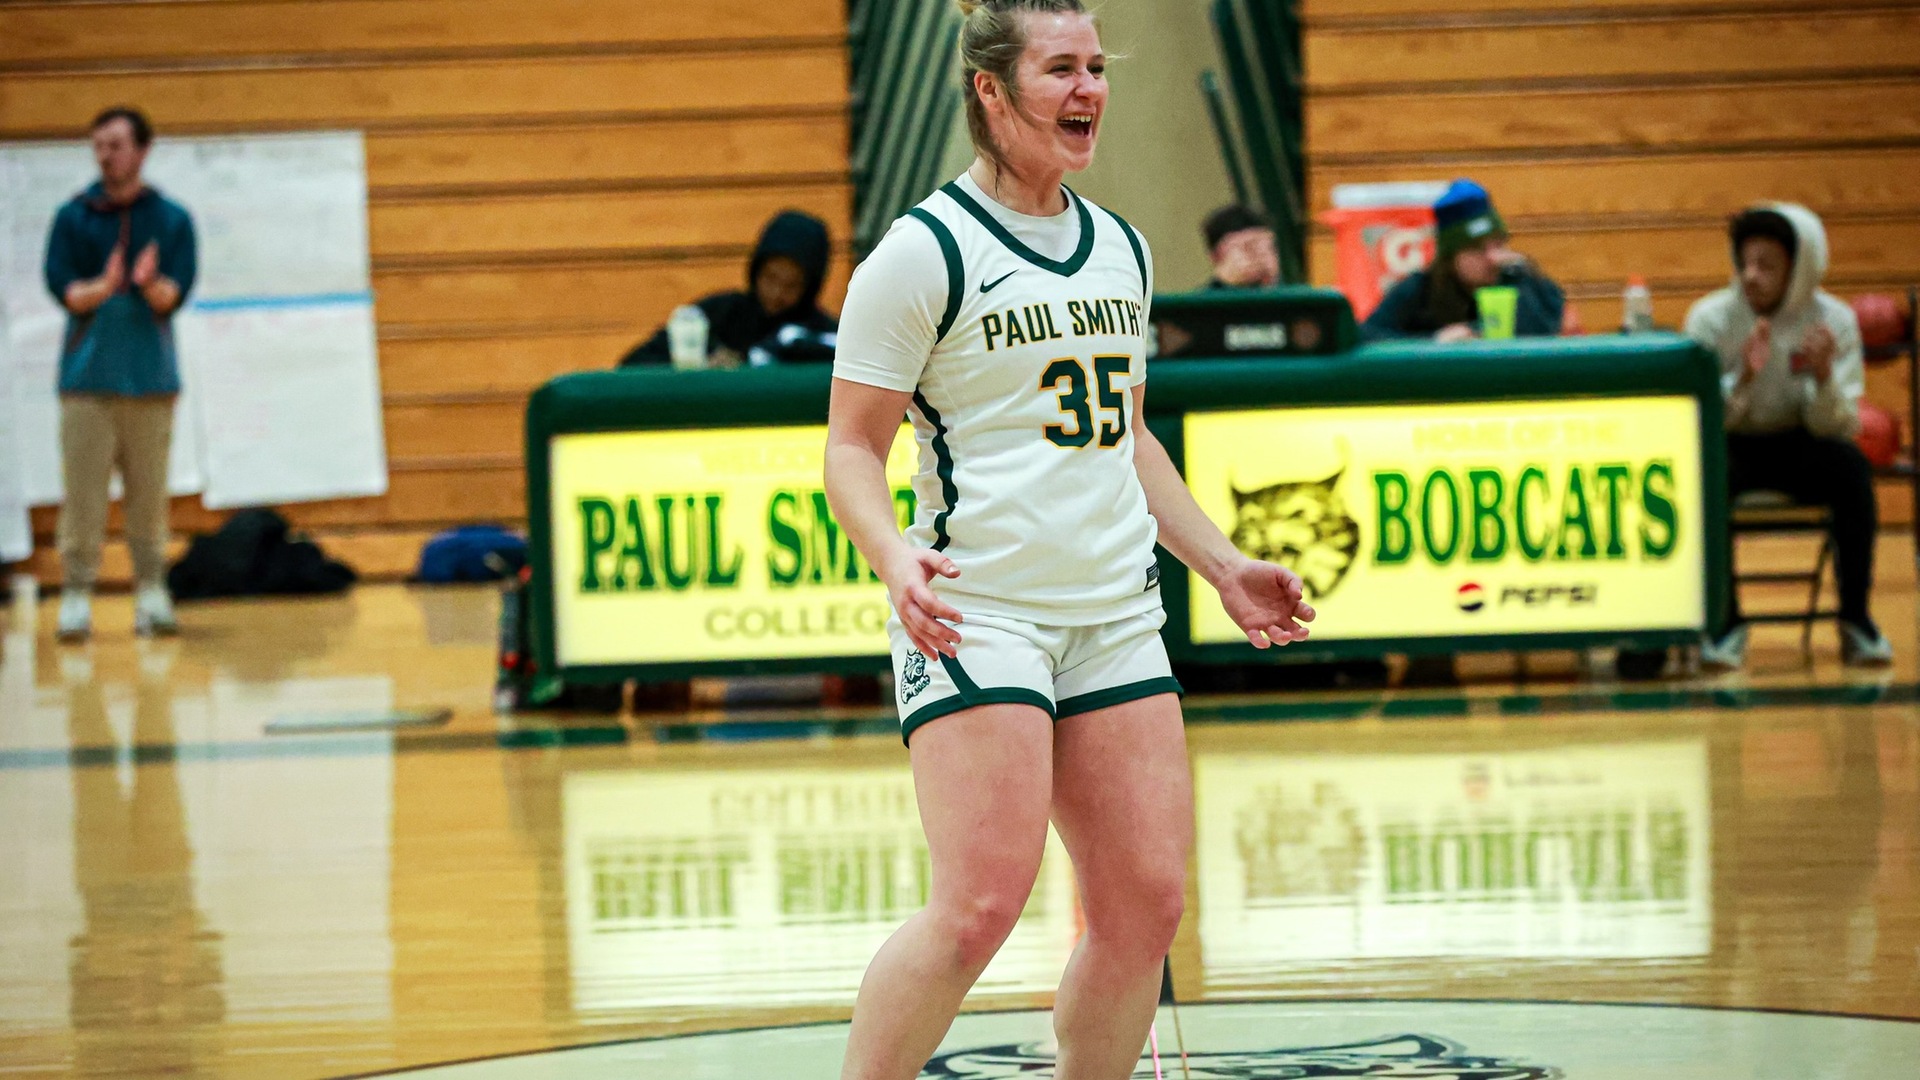 Hayleigh Gates celebrates after the Bobcats hit a three pointer in their game on Sunday vs. NHTI. (Mercedes Rideout photo) Thumbnail